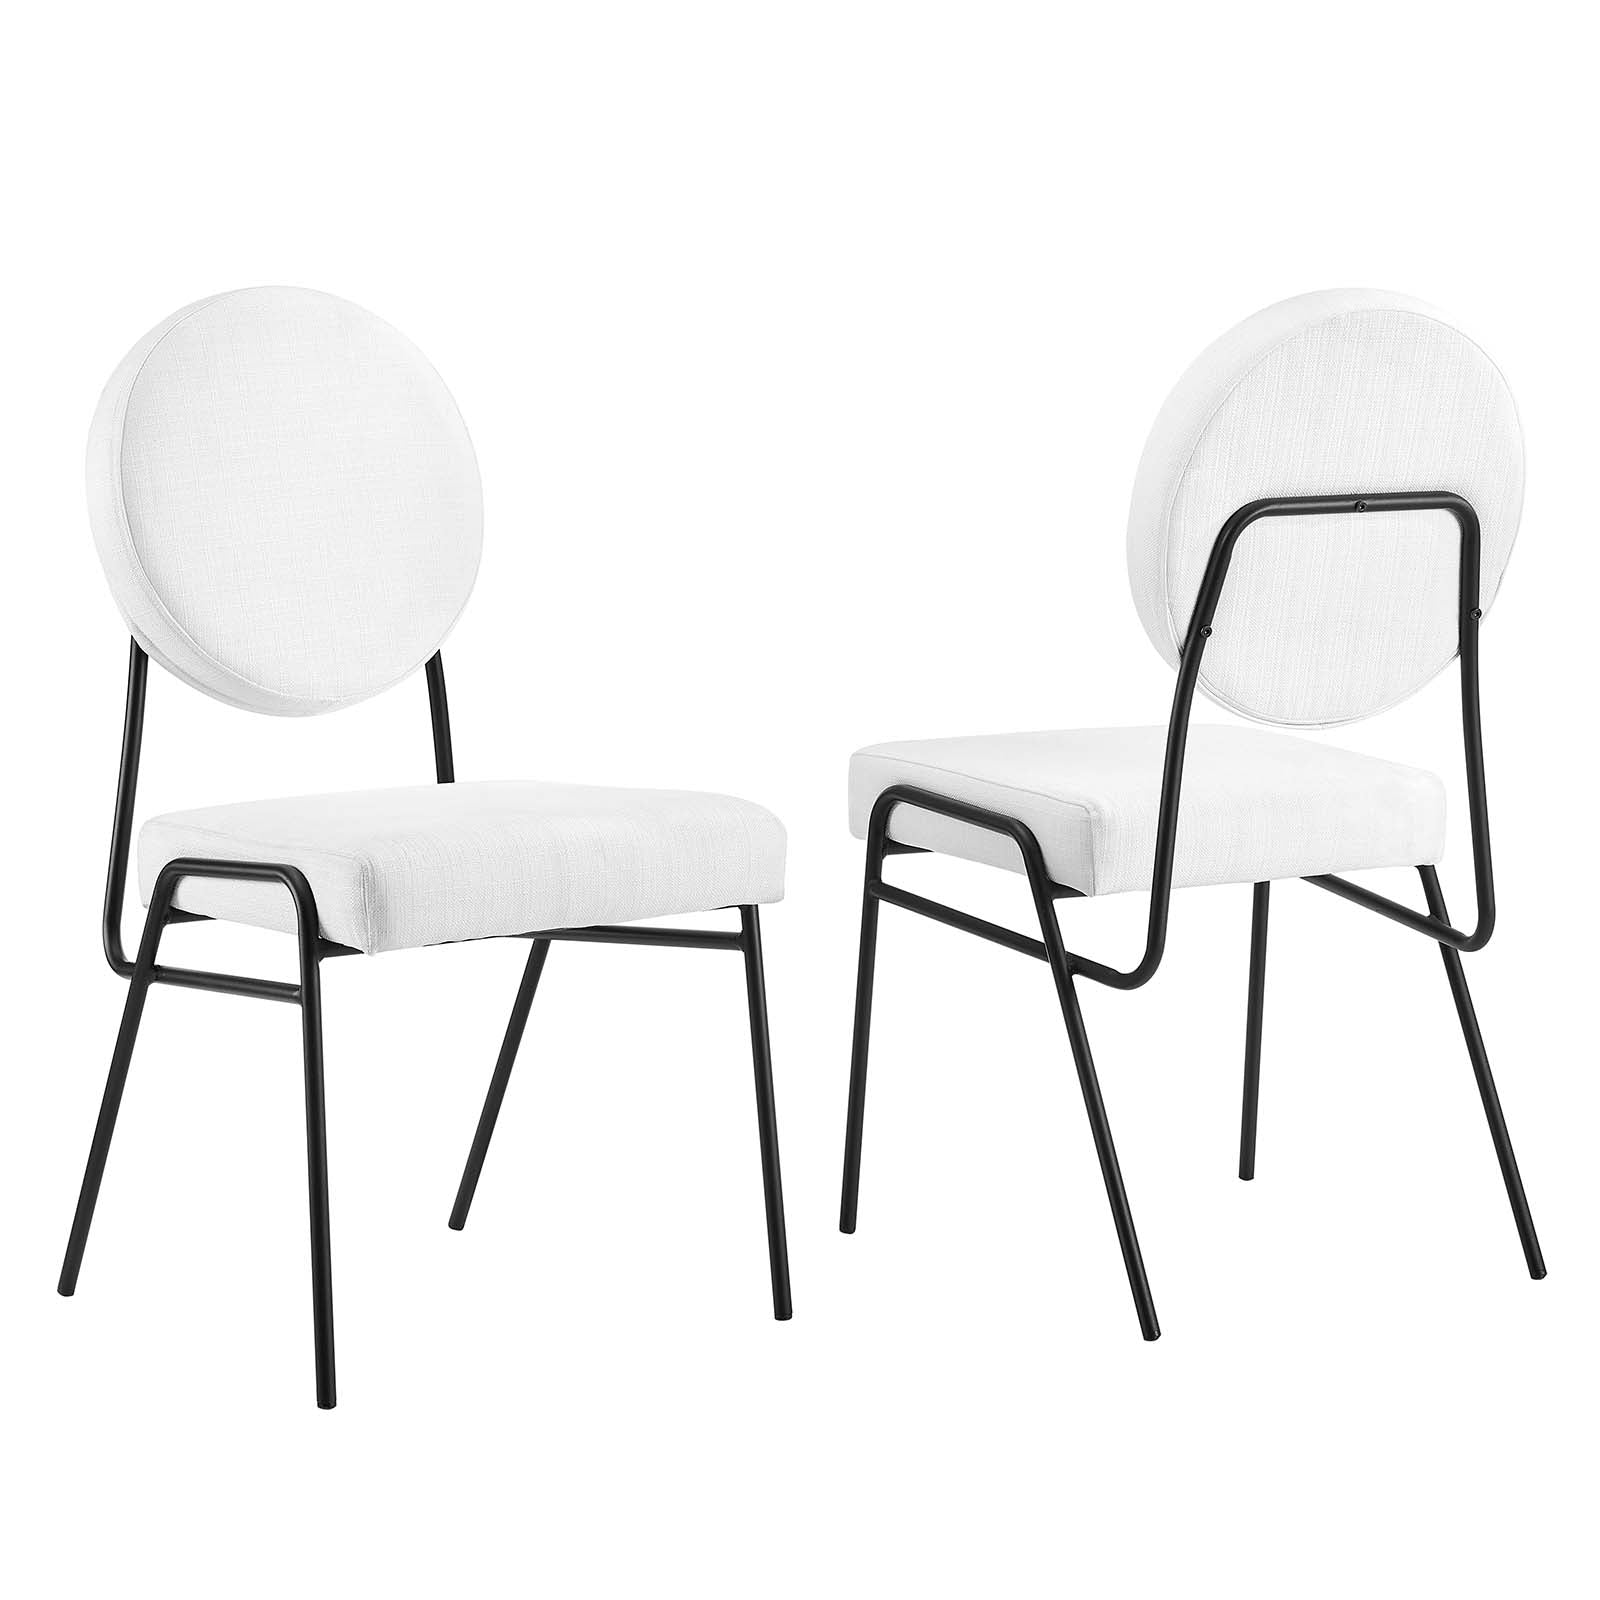 Craft Upholstered Fabric Dining Side Chairs - Set of 2 - East Shore Modern Home Furnishings